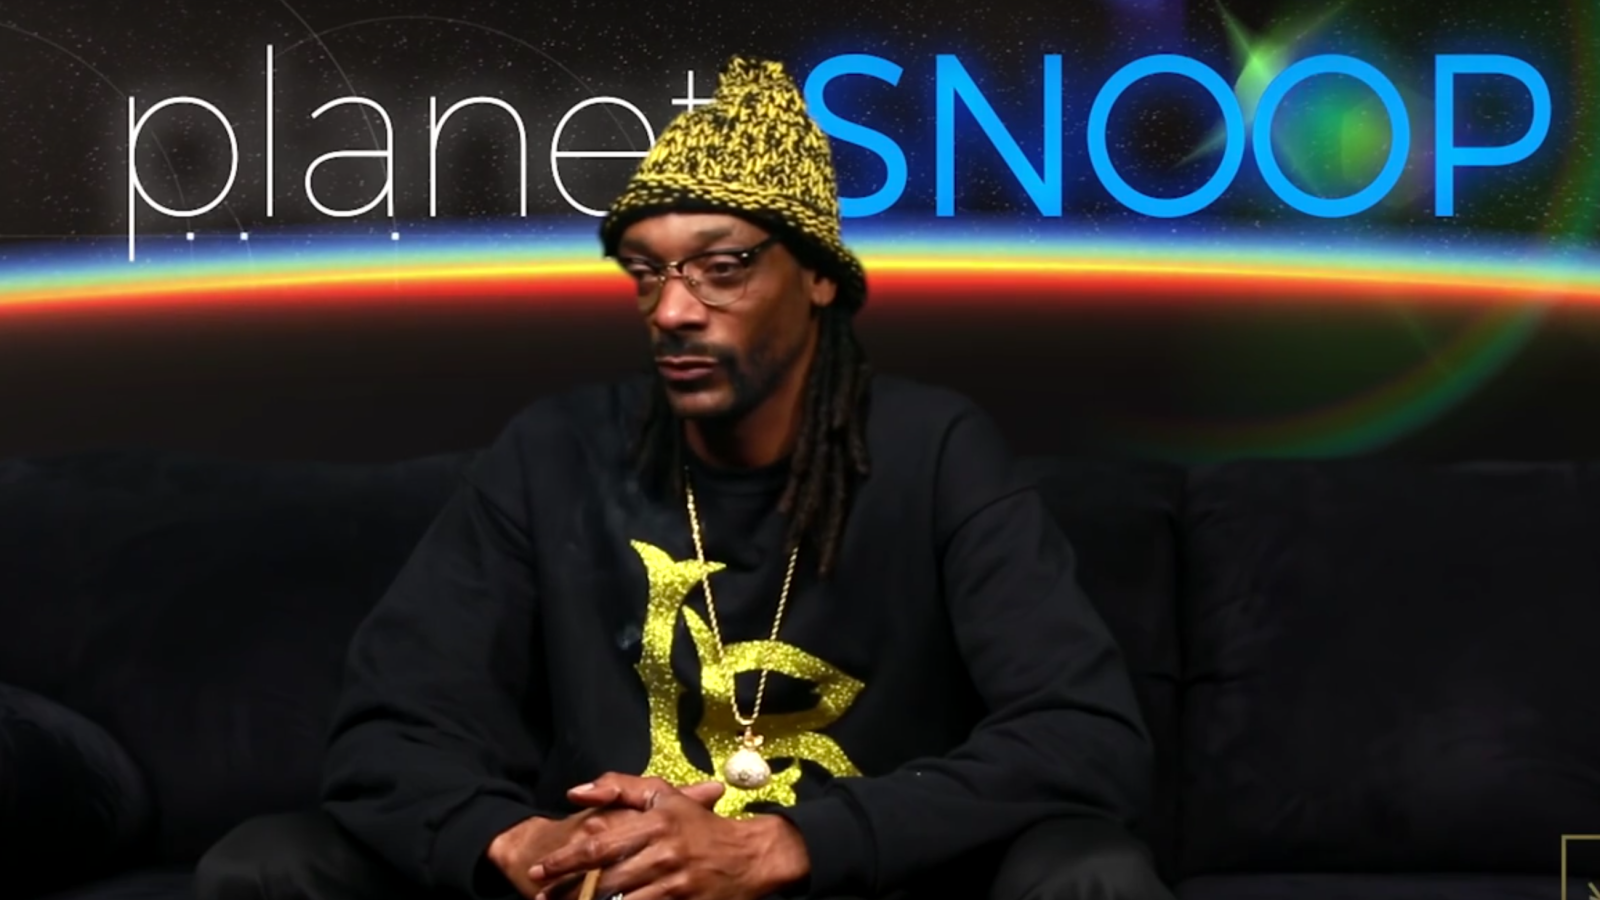 Due to popular demand, Snoop Dogg is now hosting his own nature series